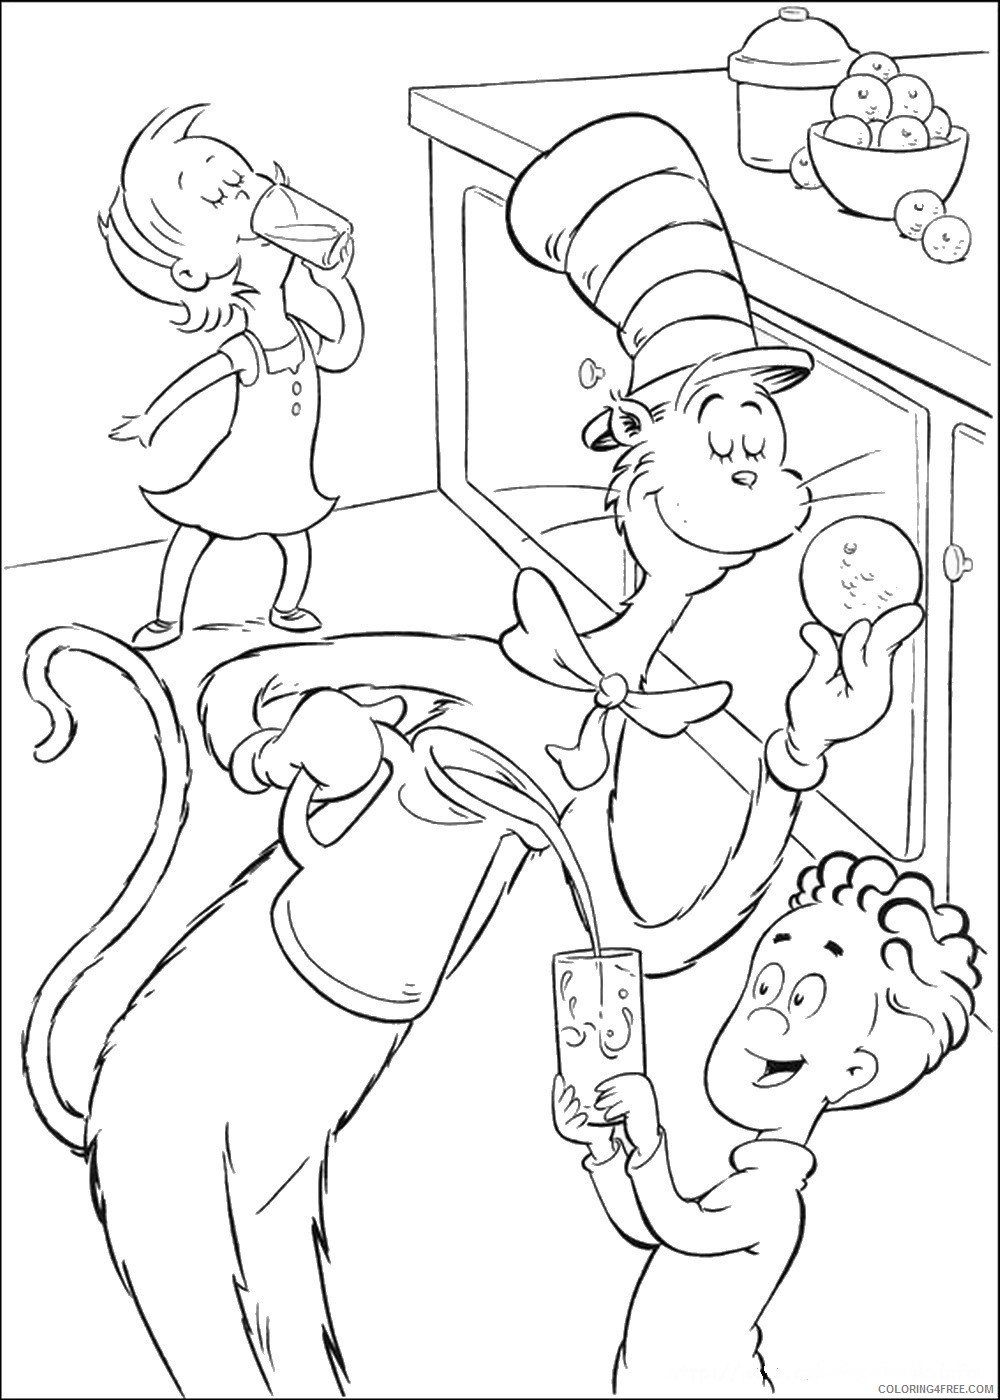 The Cat in the Hat Coloring Pages Cartoons cat_hat_cl_39 Printable 2020 6401 Coloring4free